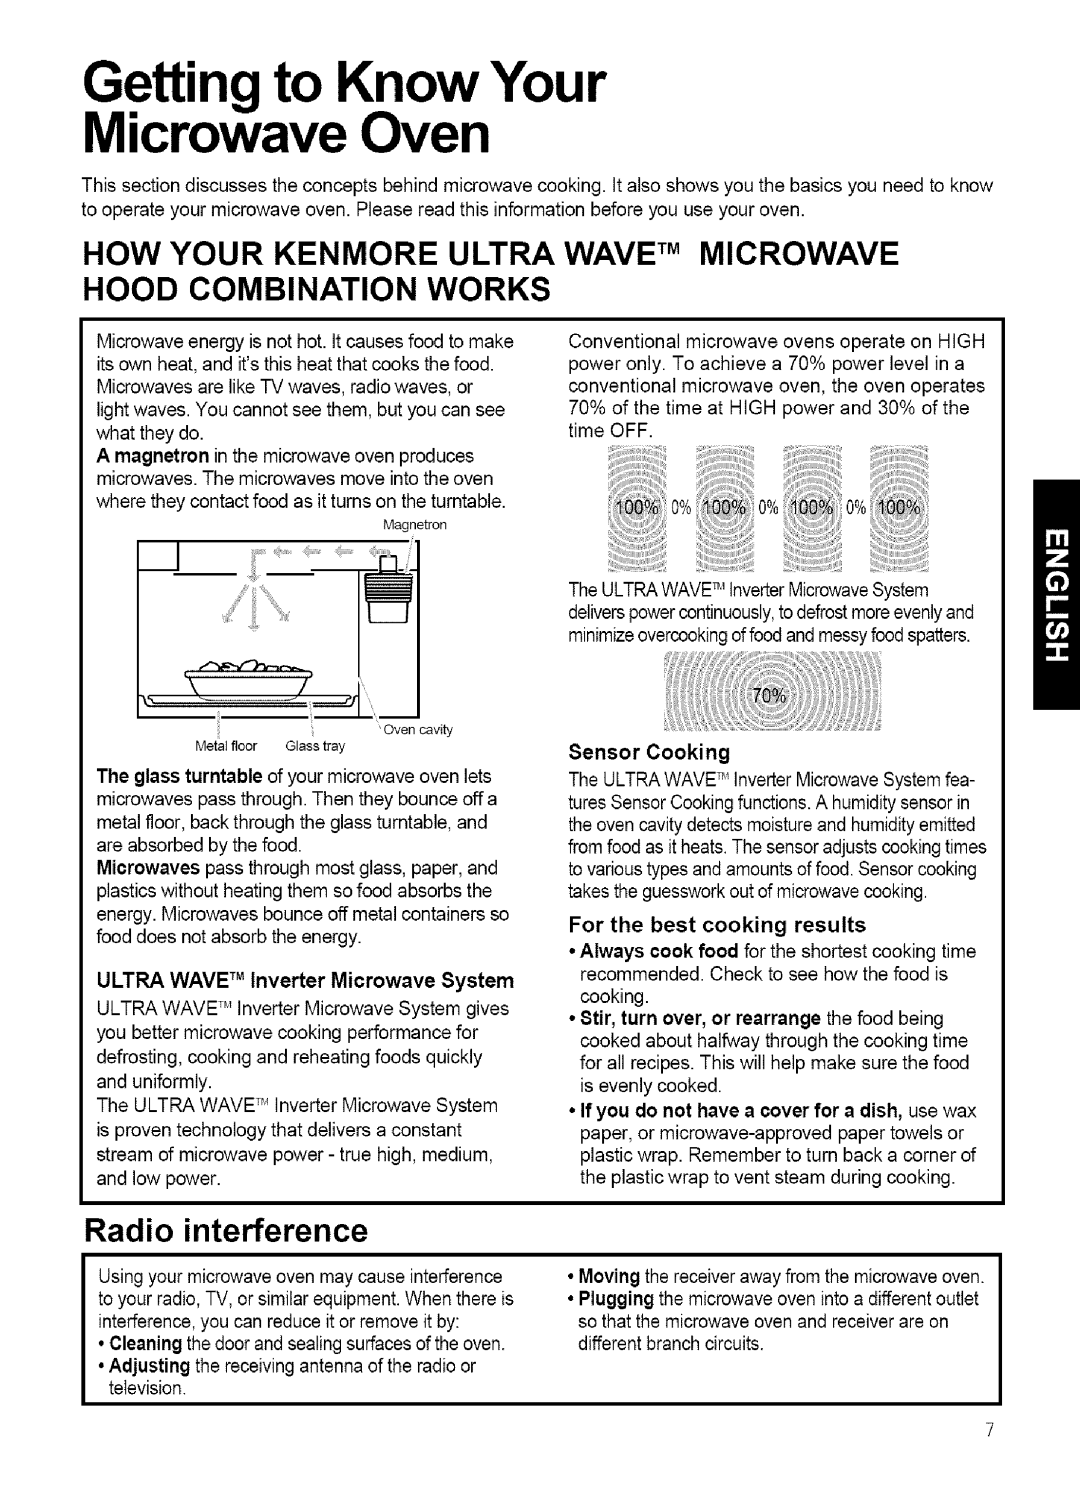 Kenmore 721.80884, 721.80889, 721.80882, 721.80883 manual Getting to Know Your Microwave Oven, Radio interference 